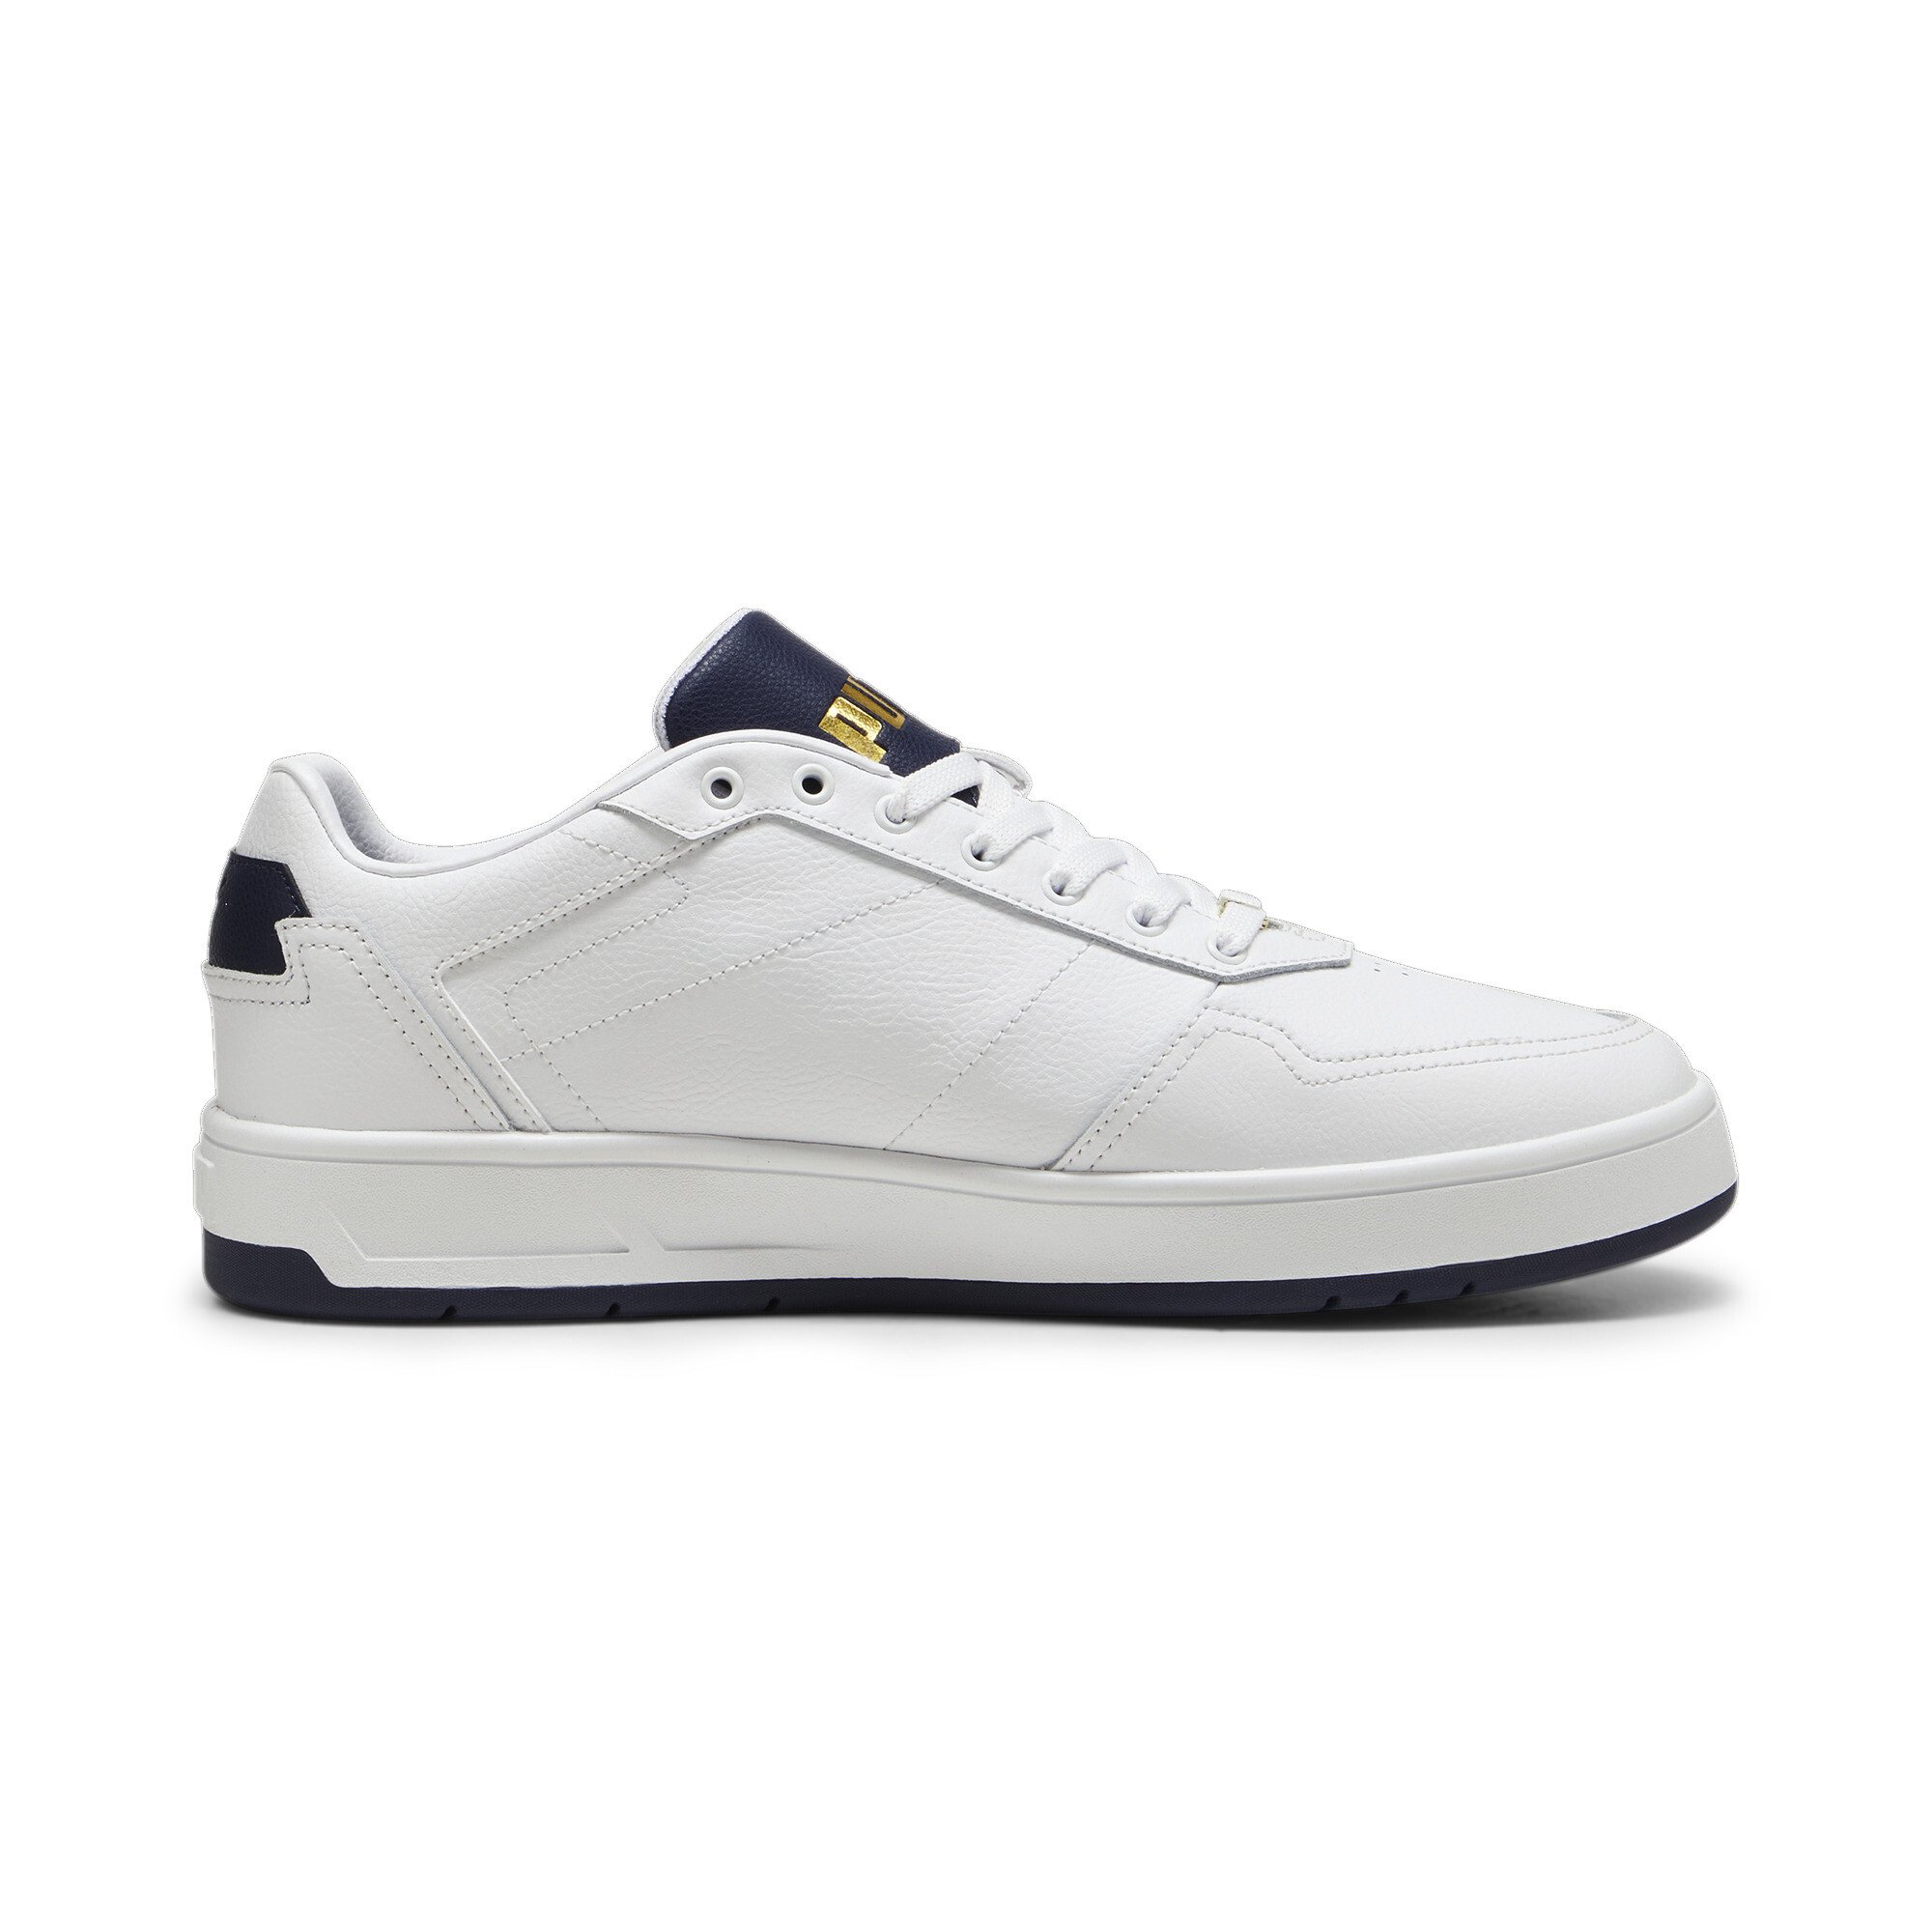 Puma Court Classic Lux Sneakers, White, Size 40, Shoes